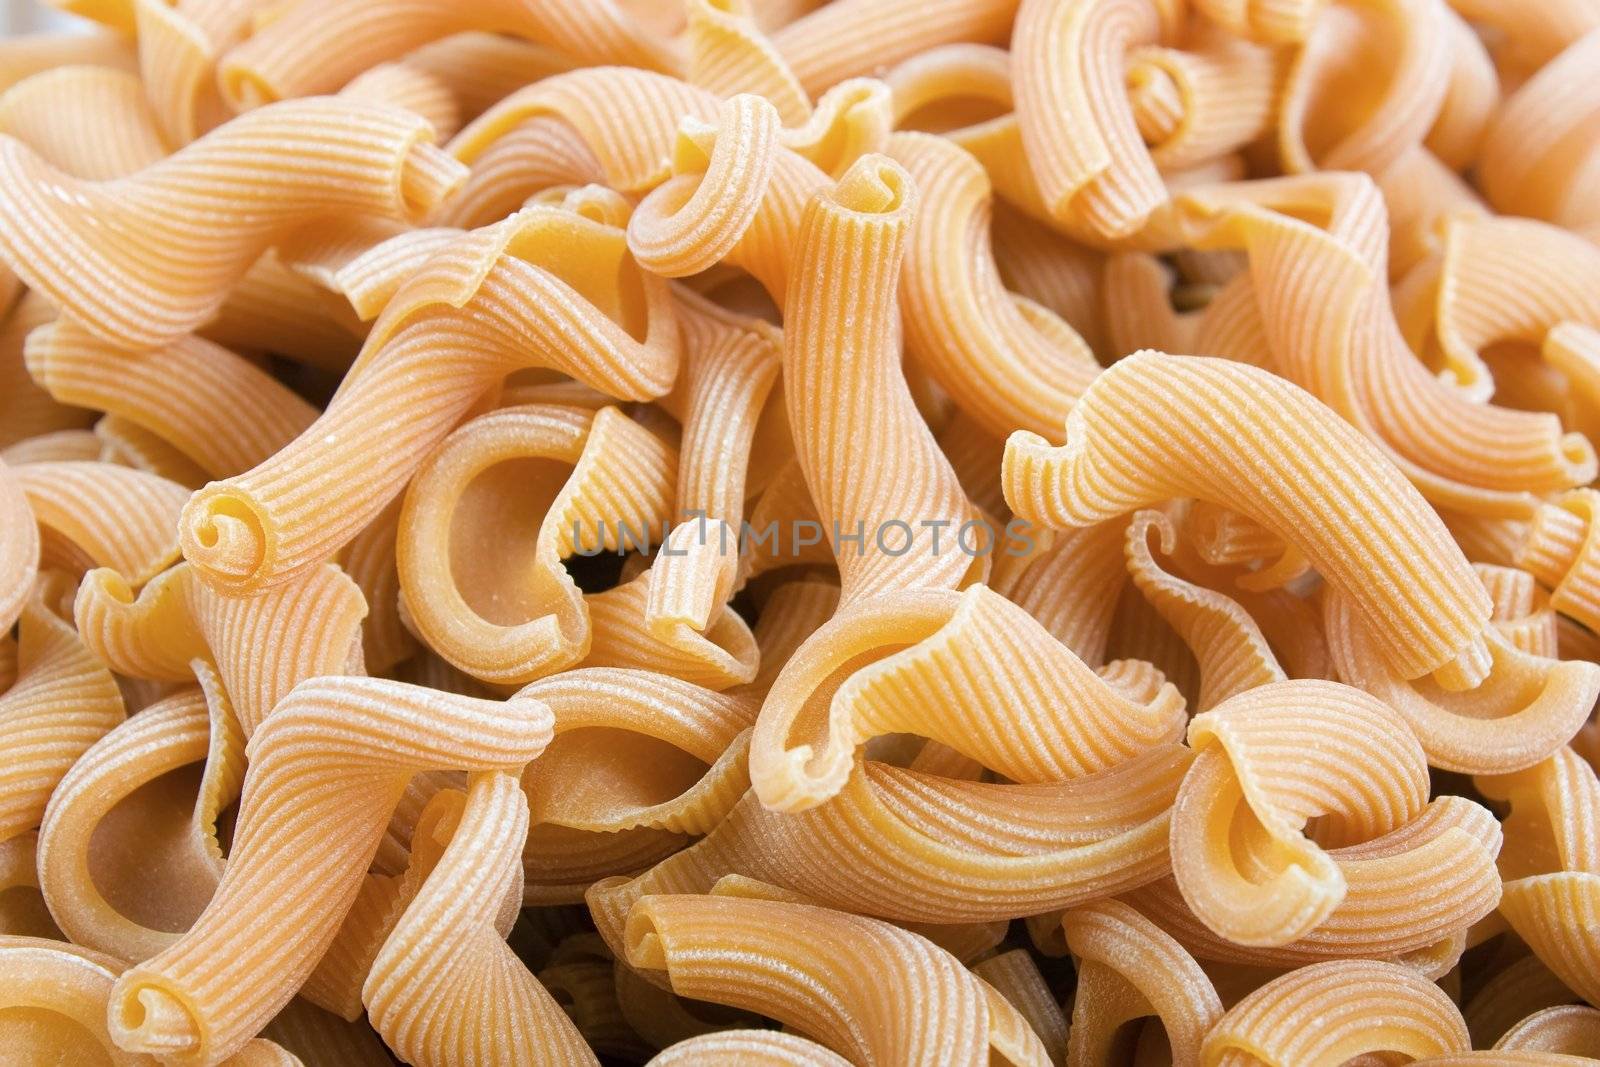 Closeup of dried gigli pasta filling entire frame.